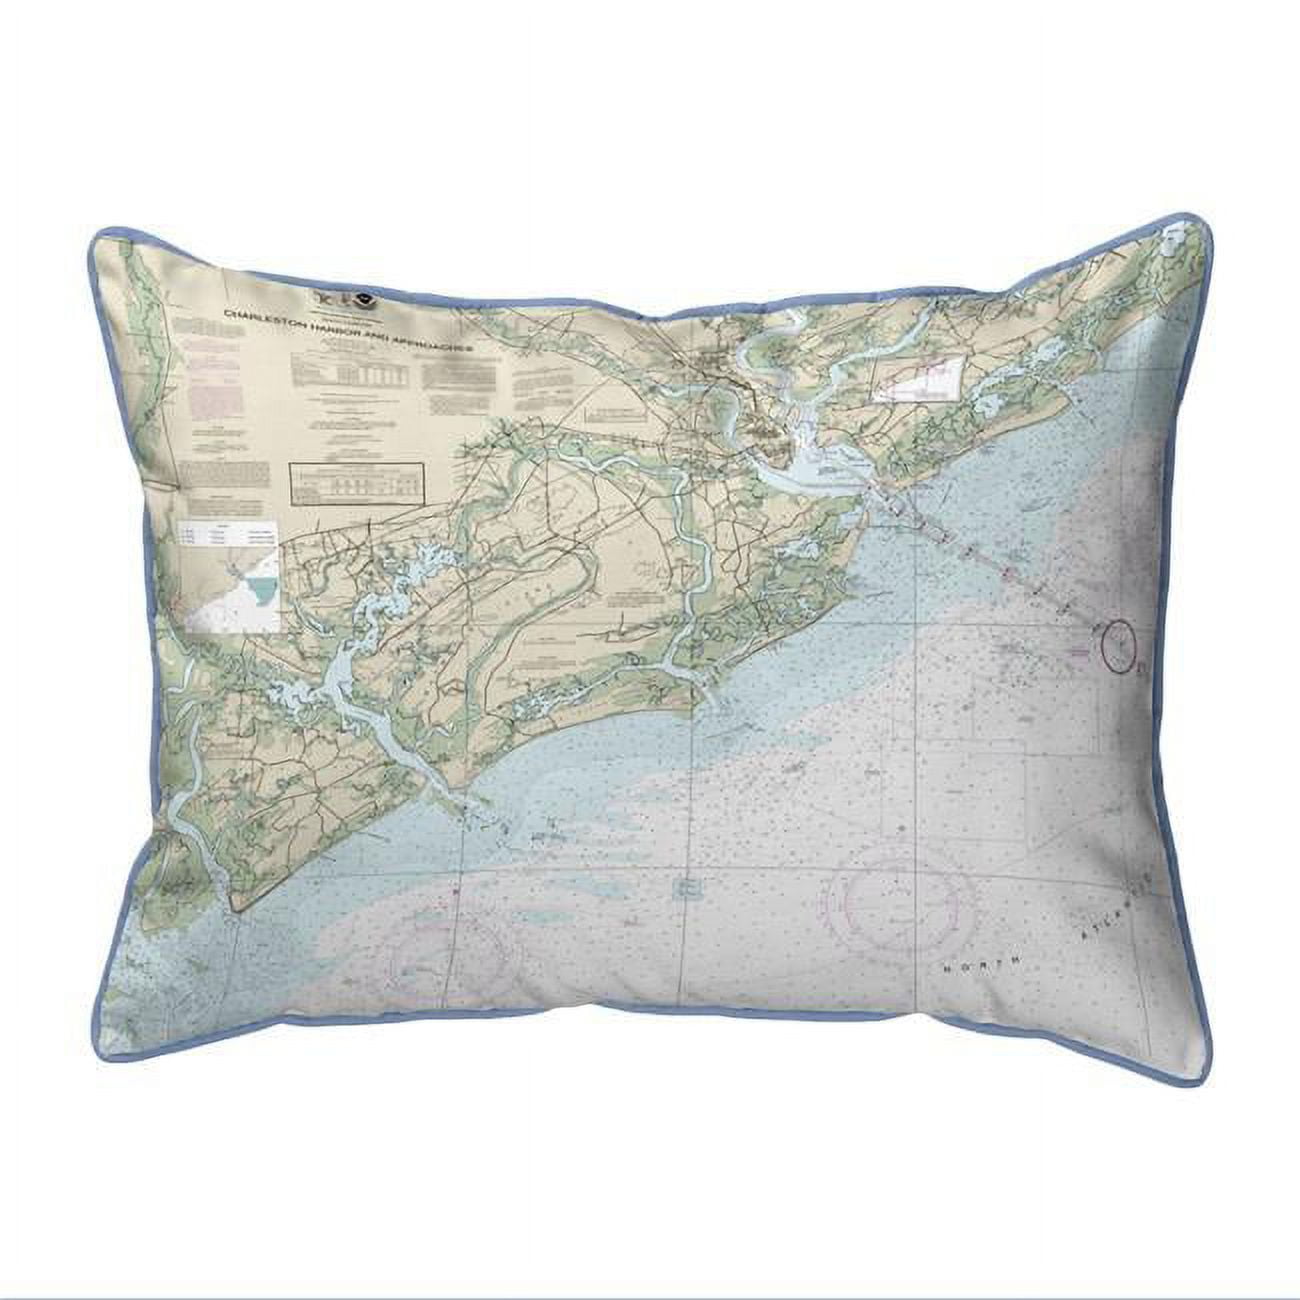 20 x 24 in. Charleston Harbor & Approaches, SC Nautical Map Extra Large Zippered Indoor & Outdoor Pillow -  JensenDistributionServices, MI2817670